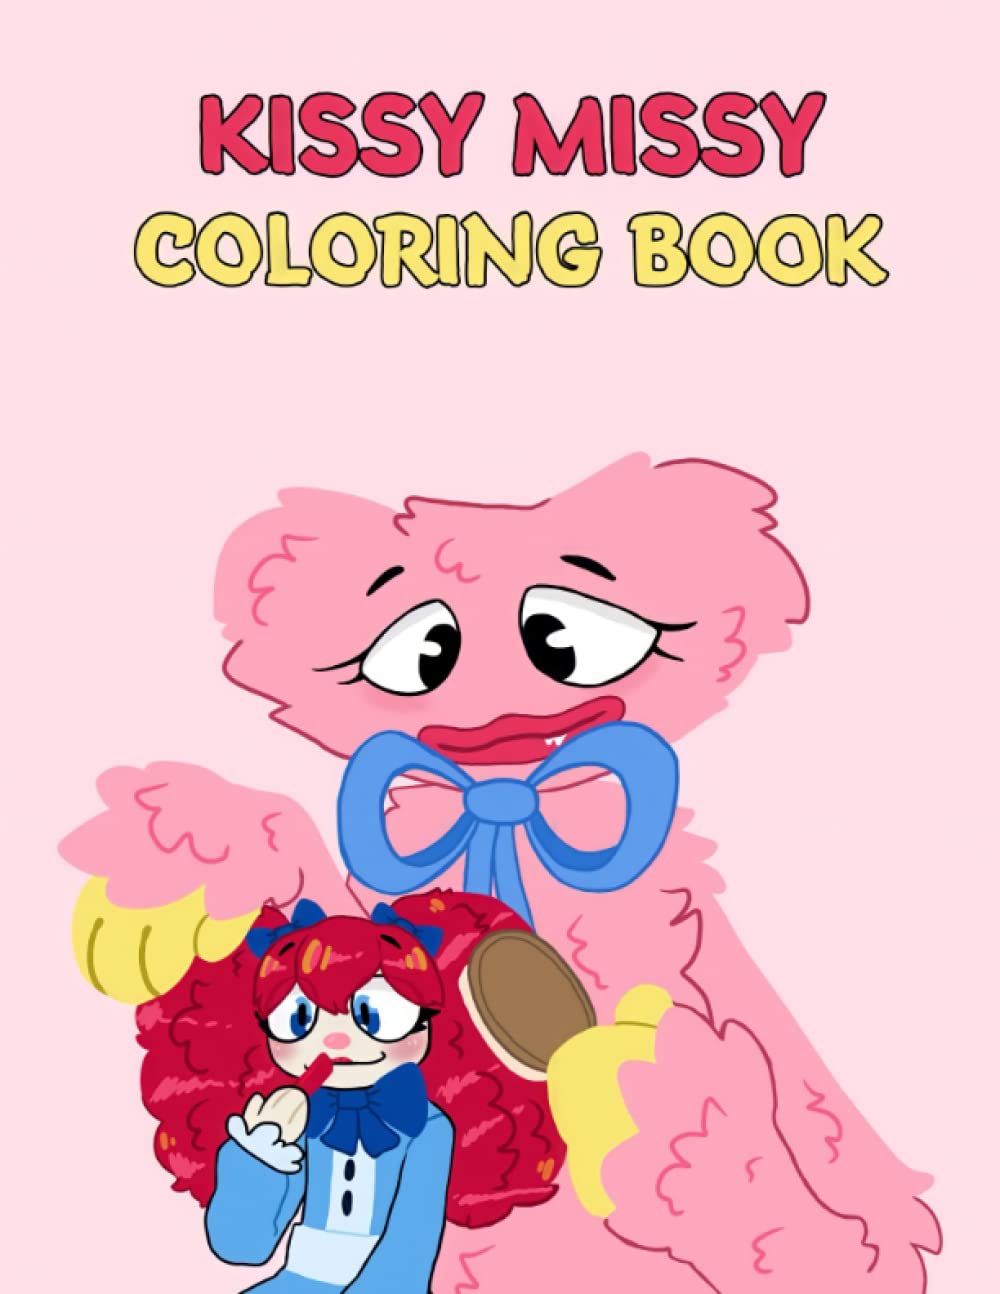 Kissy missy Coloring book: 30 Pages of High Quality coloring Designs For Kids And Adults. Puppy playtime Book. 5 x 11